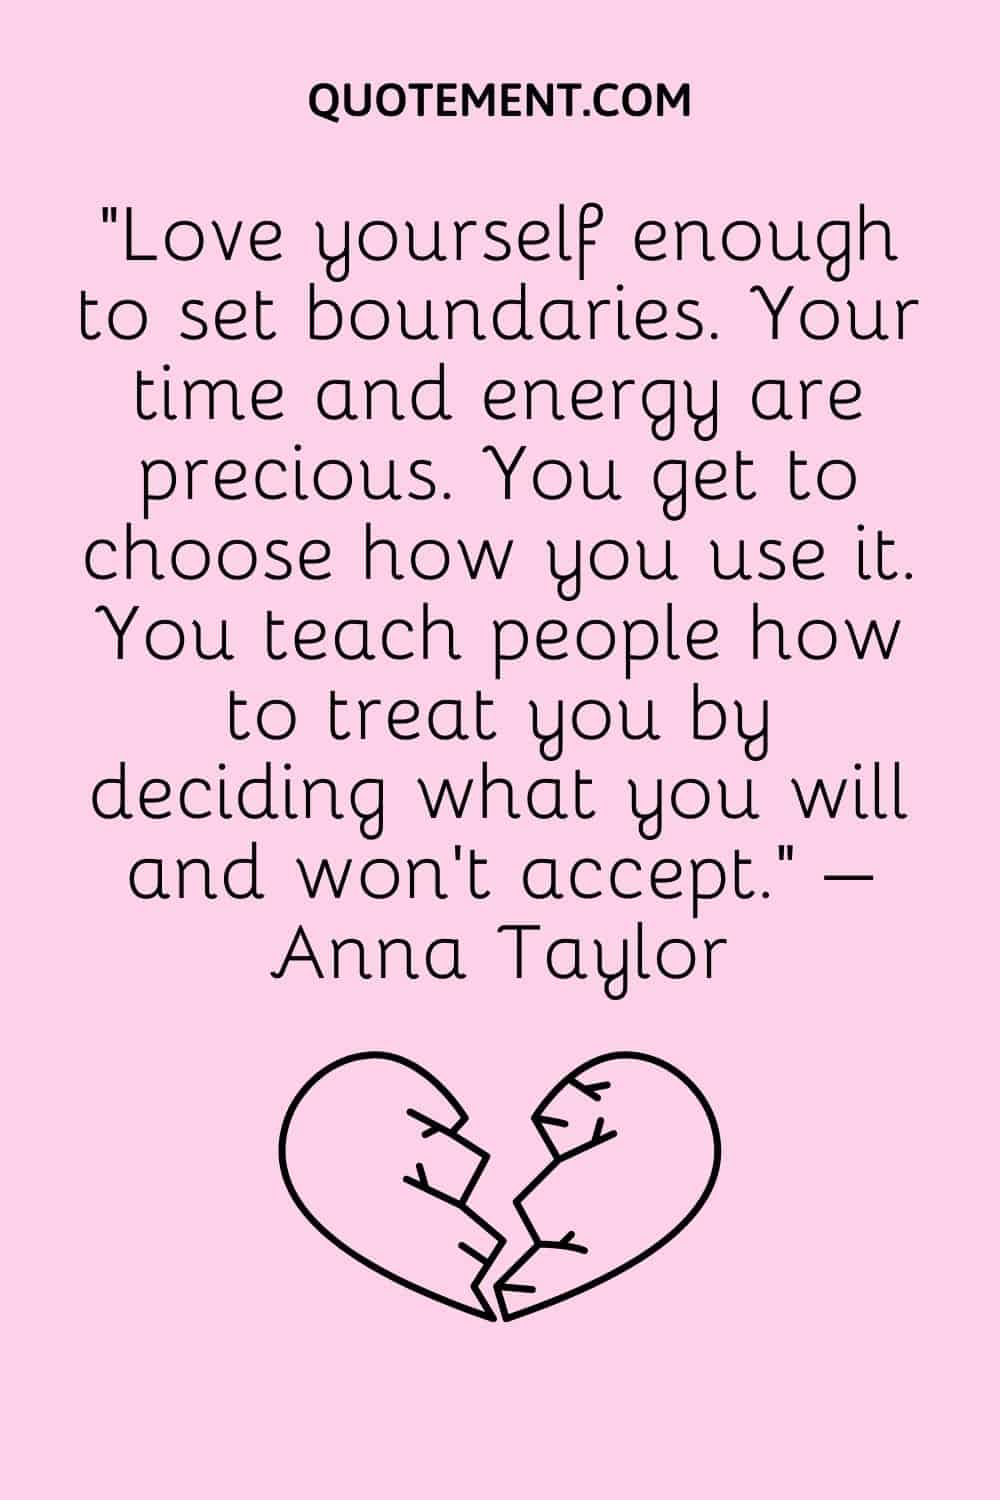 “Love yourself enough to set boundaries. Your time and energy are precious. You get to choose how you use it. You teach people how to treat you by deciding what you will and won’t accept.” – Anna Taylor